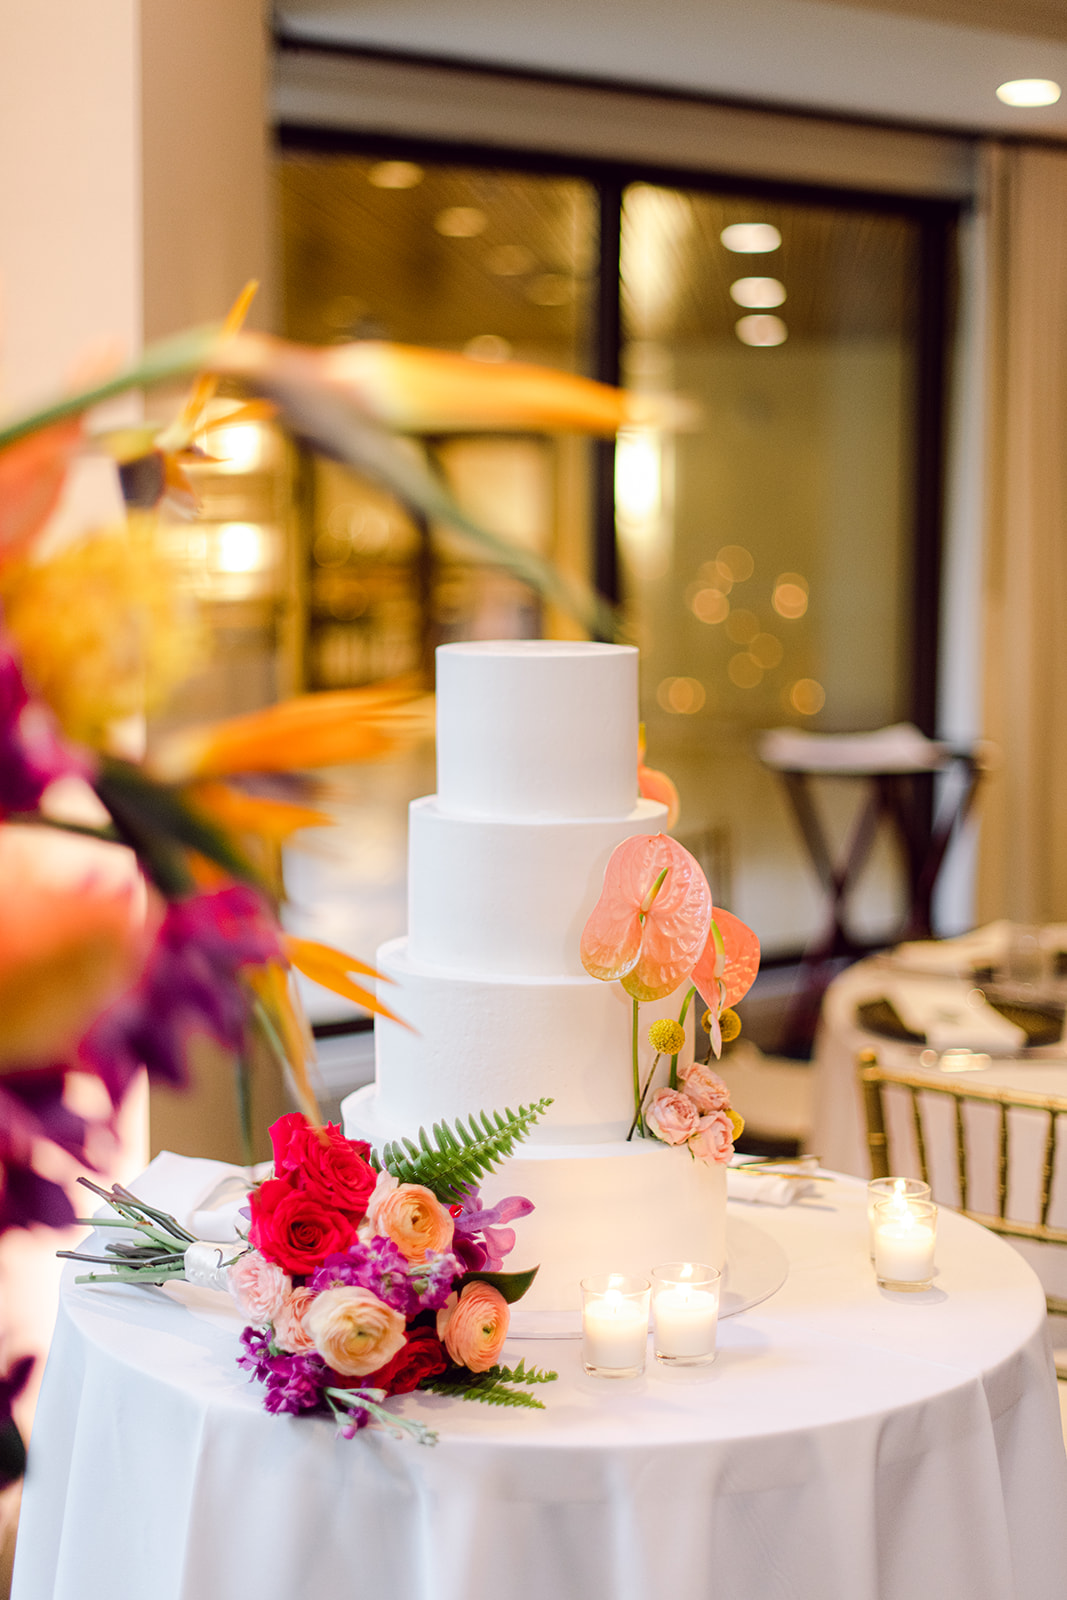 Photo of wedding cake with candles and flowers for reception at Mayfair House Hotel & Garden in Miami on wedding day.